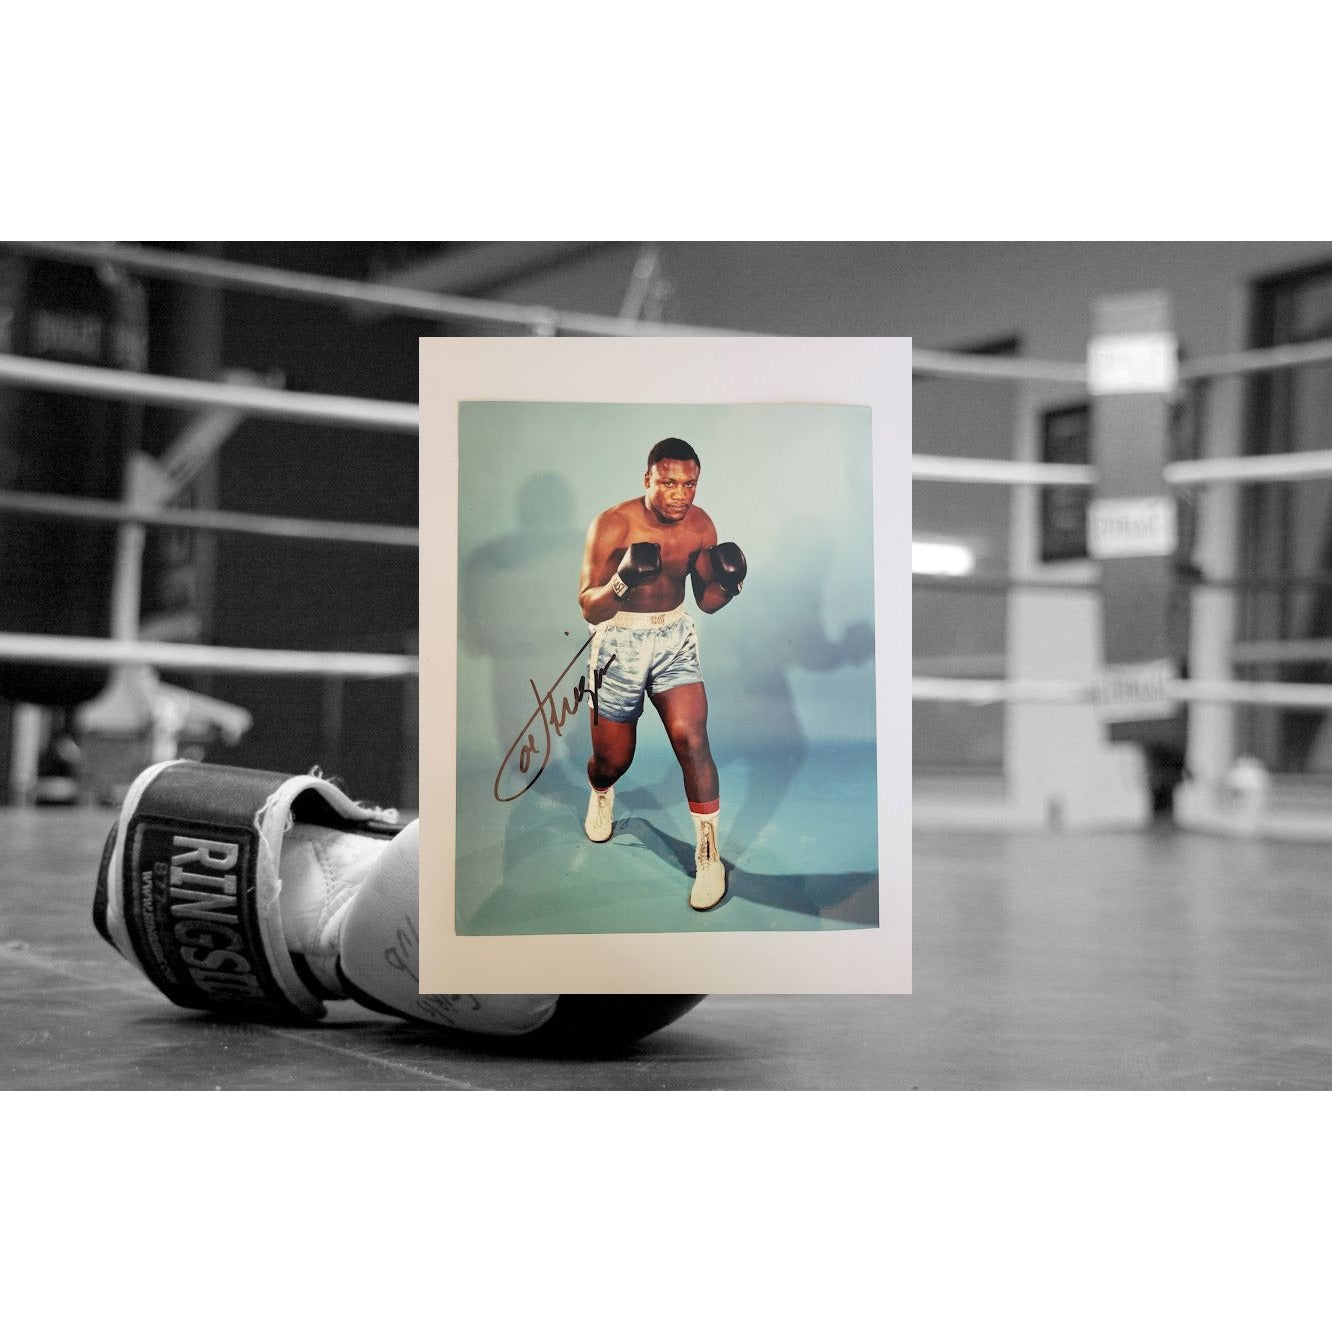 Joe Frazier 8 x 10 photo signed with proof